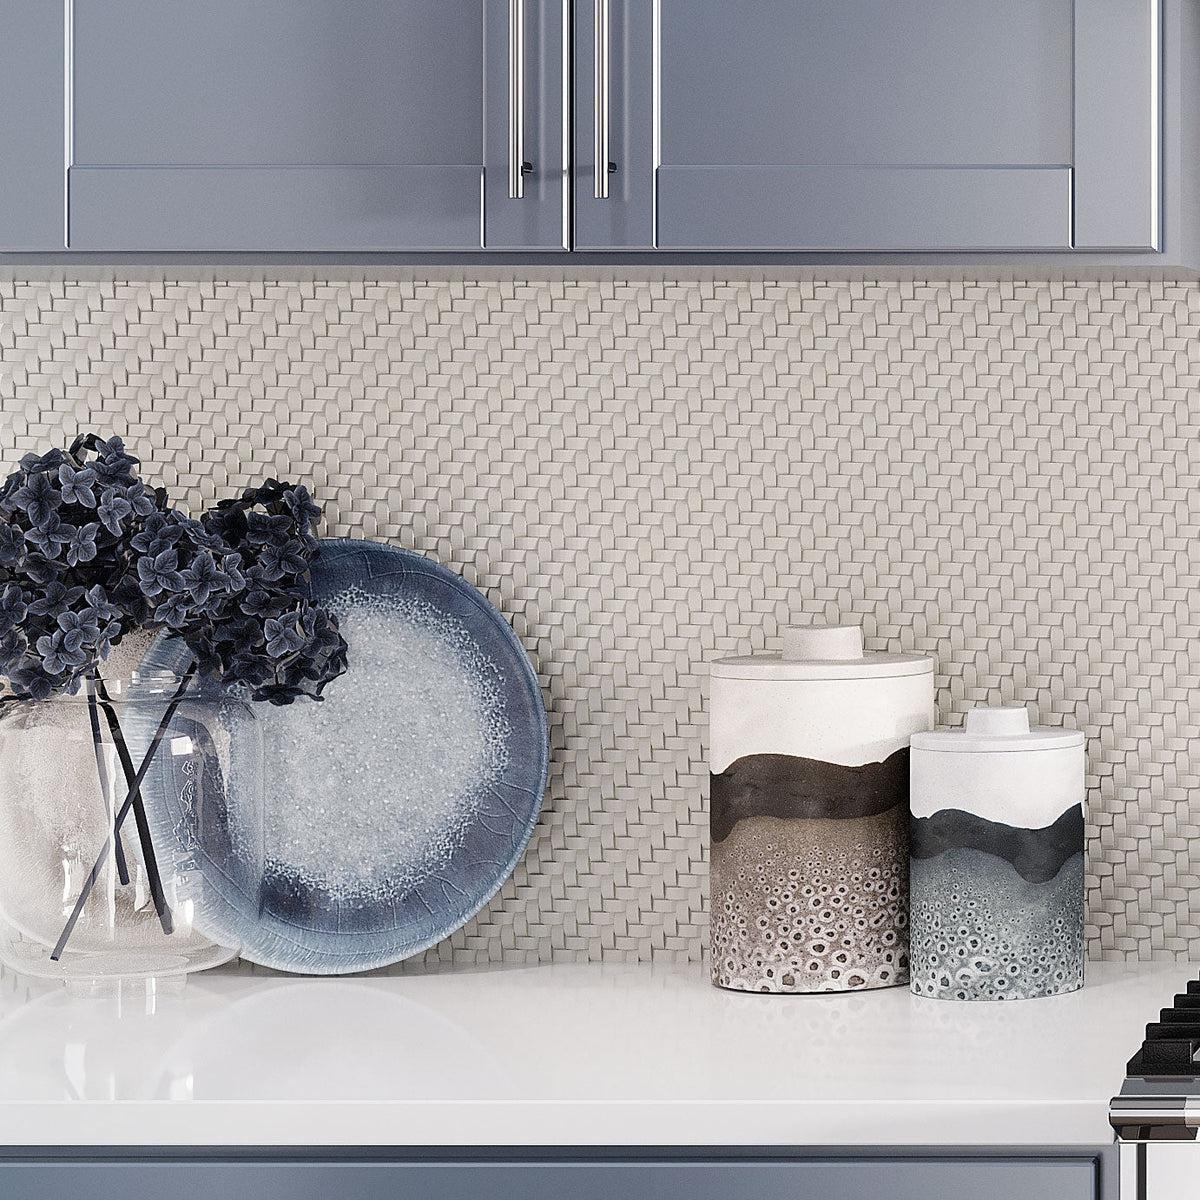 Cream recycled glass basket weave mosaic tile kitchen backsplash and cool gray 